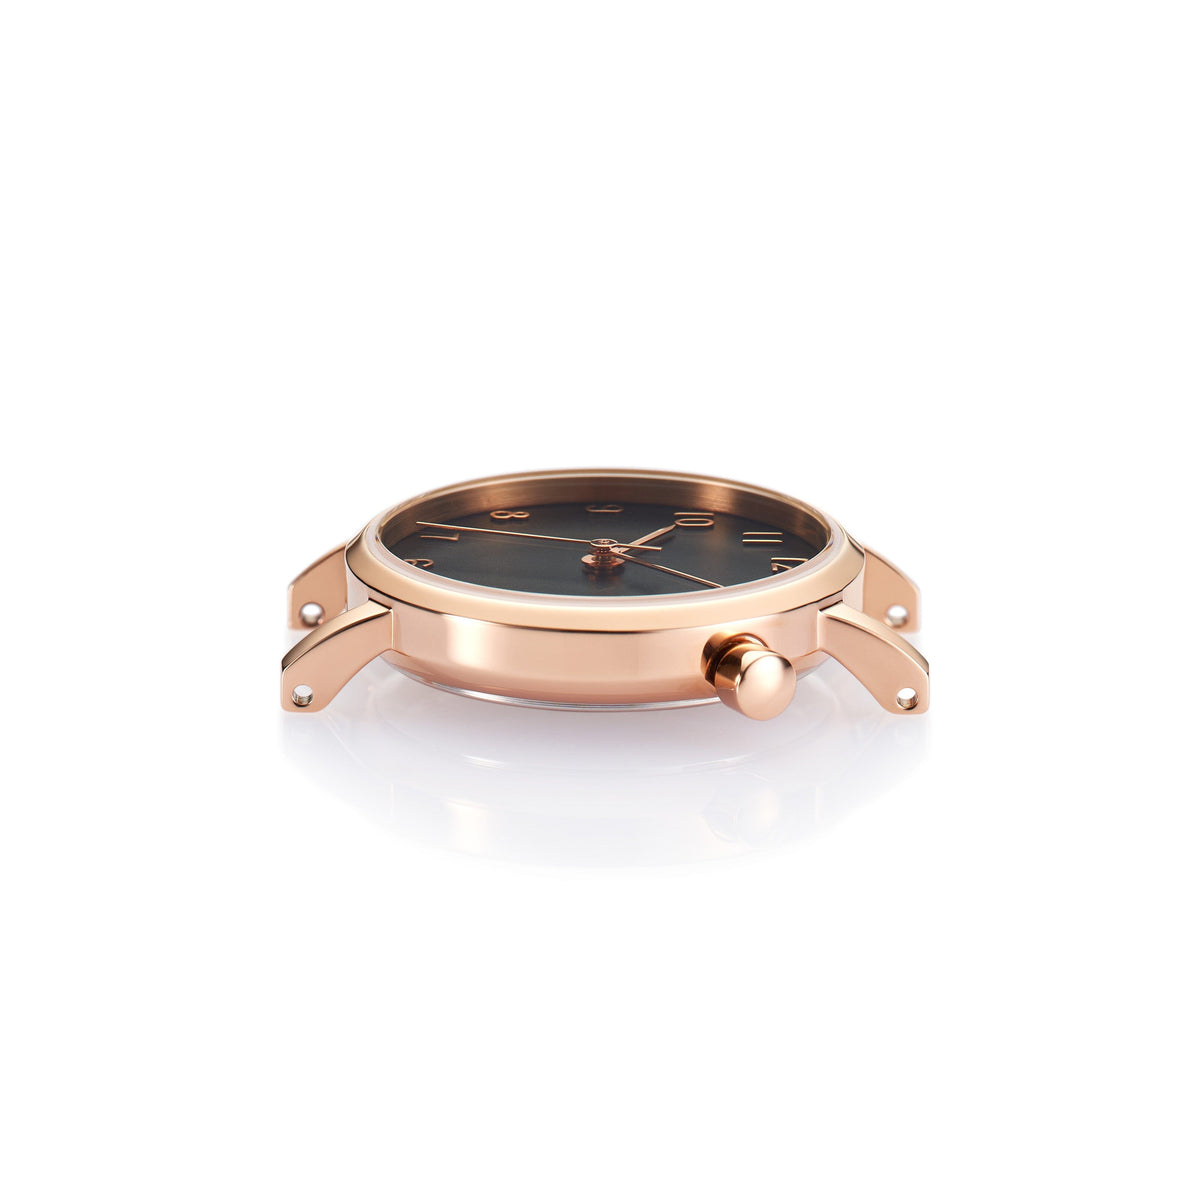 The Black and Rose Gold Watch -  Ivory (Kids)